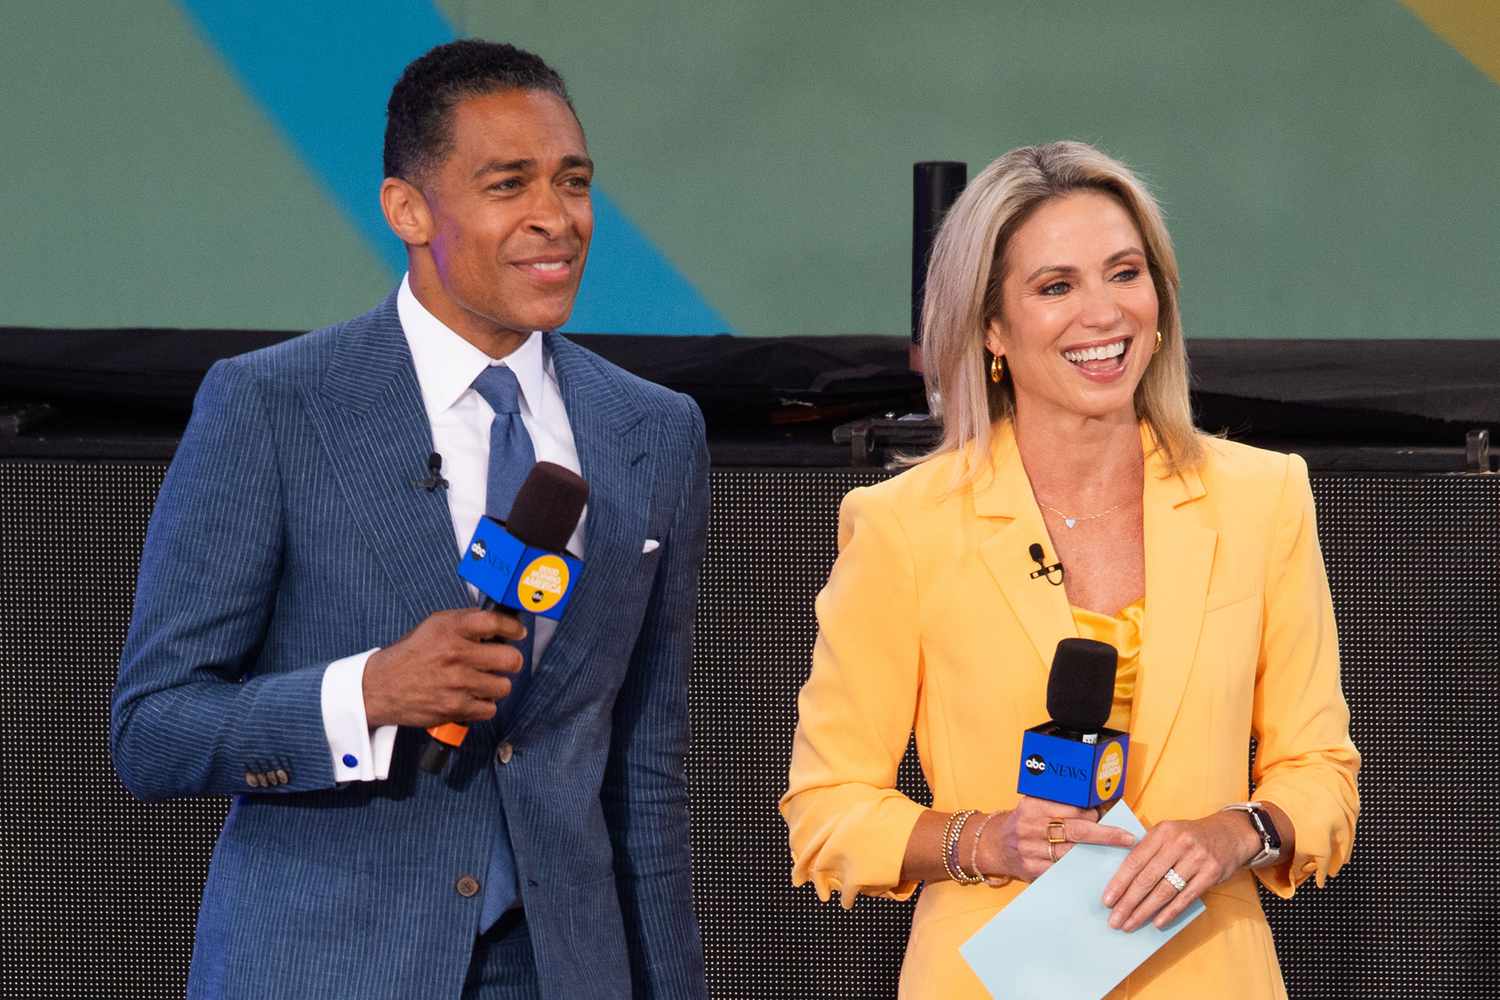 T.J. Holmes and Amy Robach on 'Good Morning America'